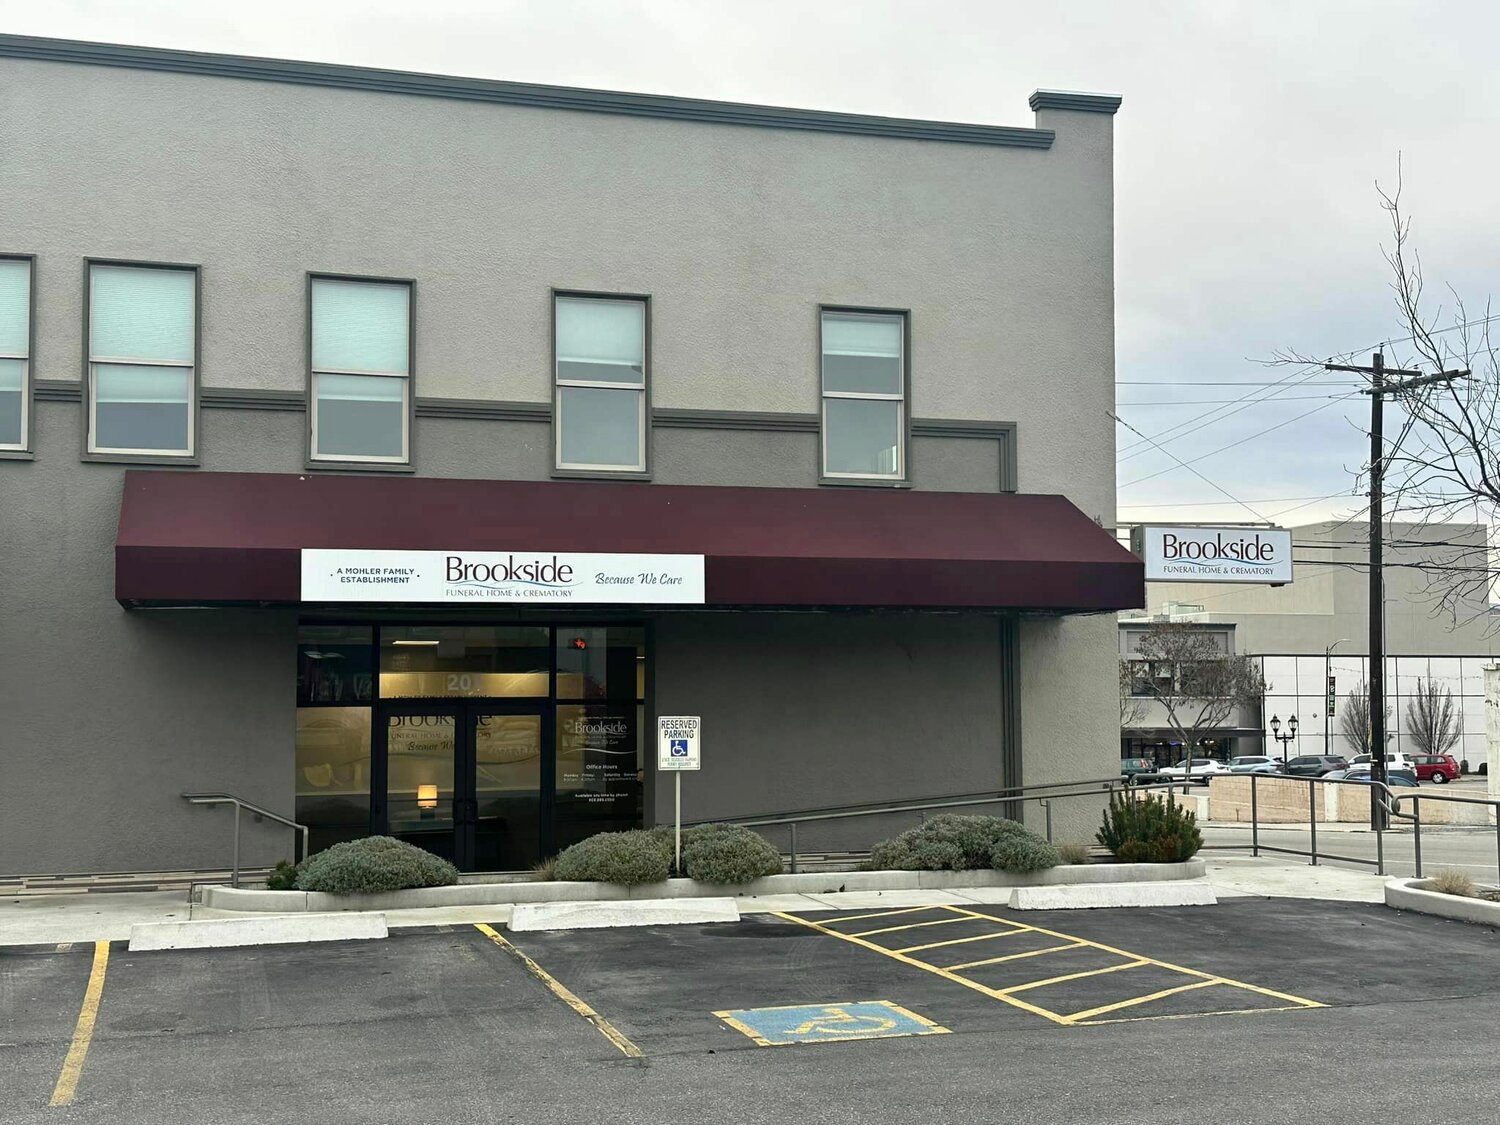 The new Brookside Funeral Home & Crematory in Wenatchee, located at 201 N Mission Street, stands ready to serve the community, reflecting the company's commitment to providing compassionate funeral services in the region.